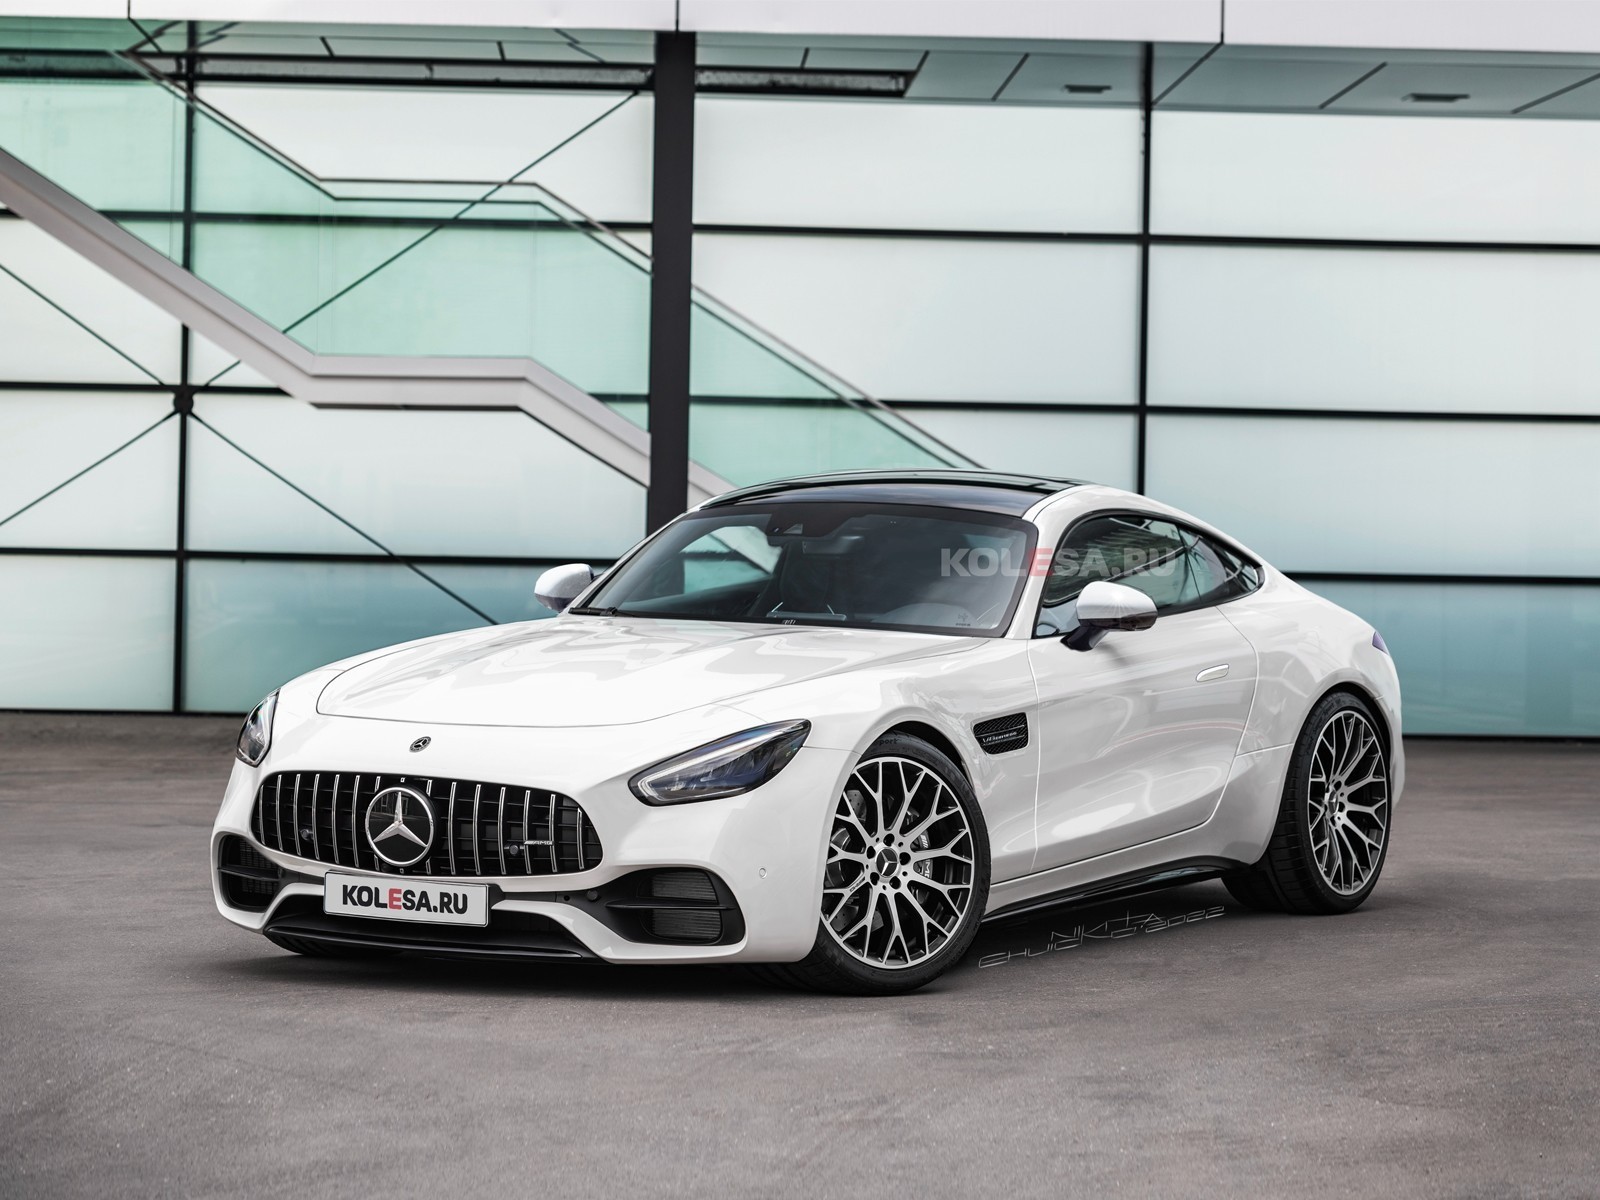 New 2024 Mercedes-AMG GT Tickles Our Taste Buds in Unofficial